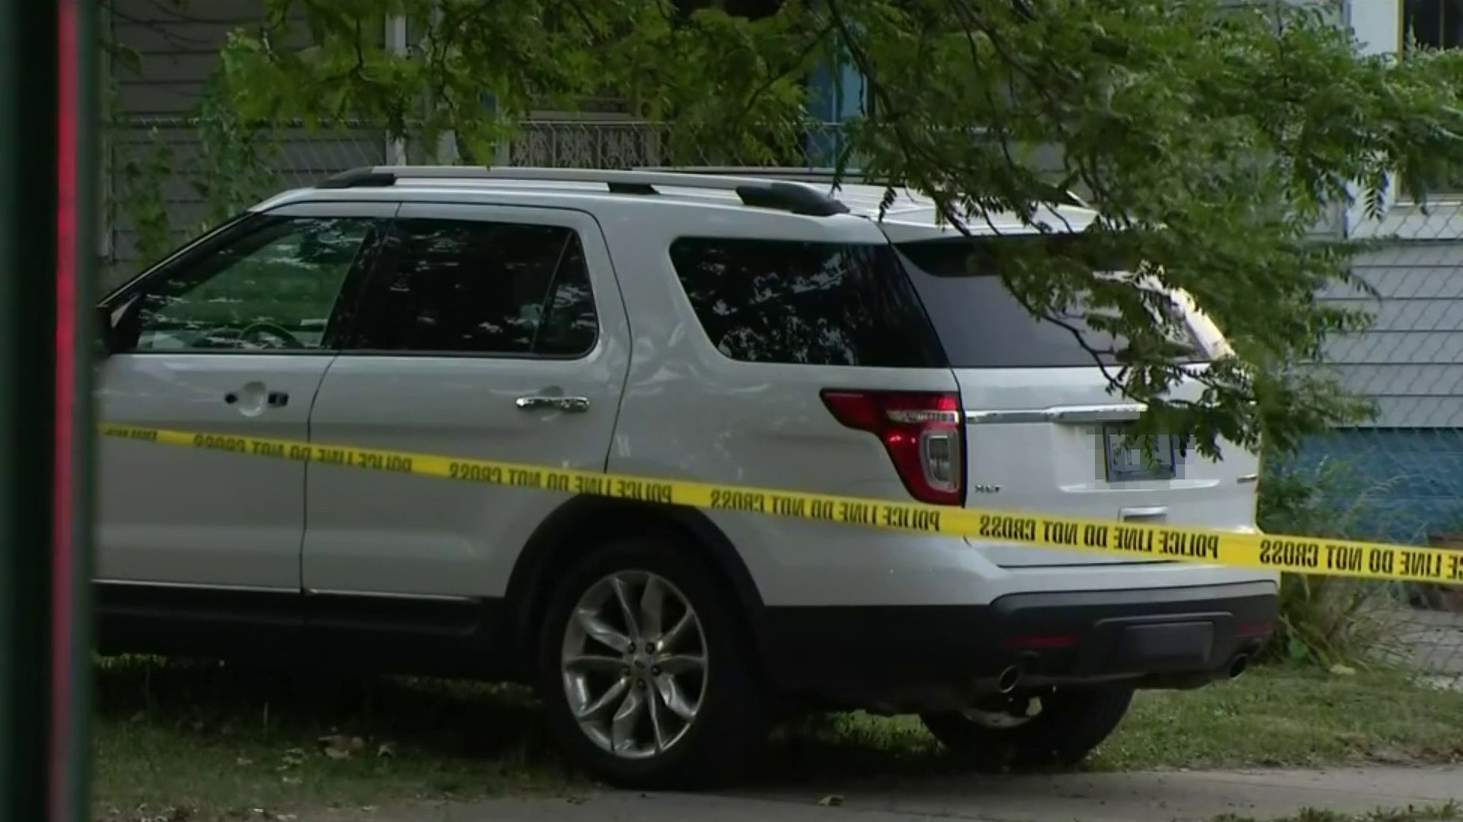 Woman’s body found in SUV on Detroit’s west side, police investigating as a possible murder